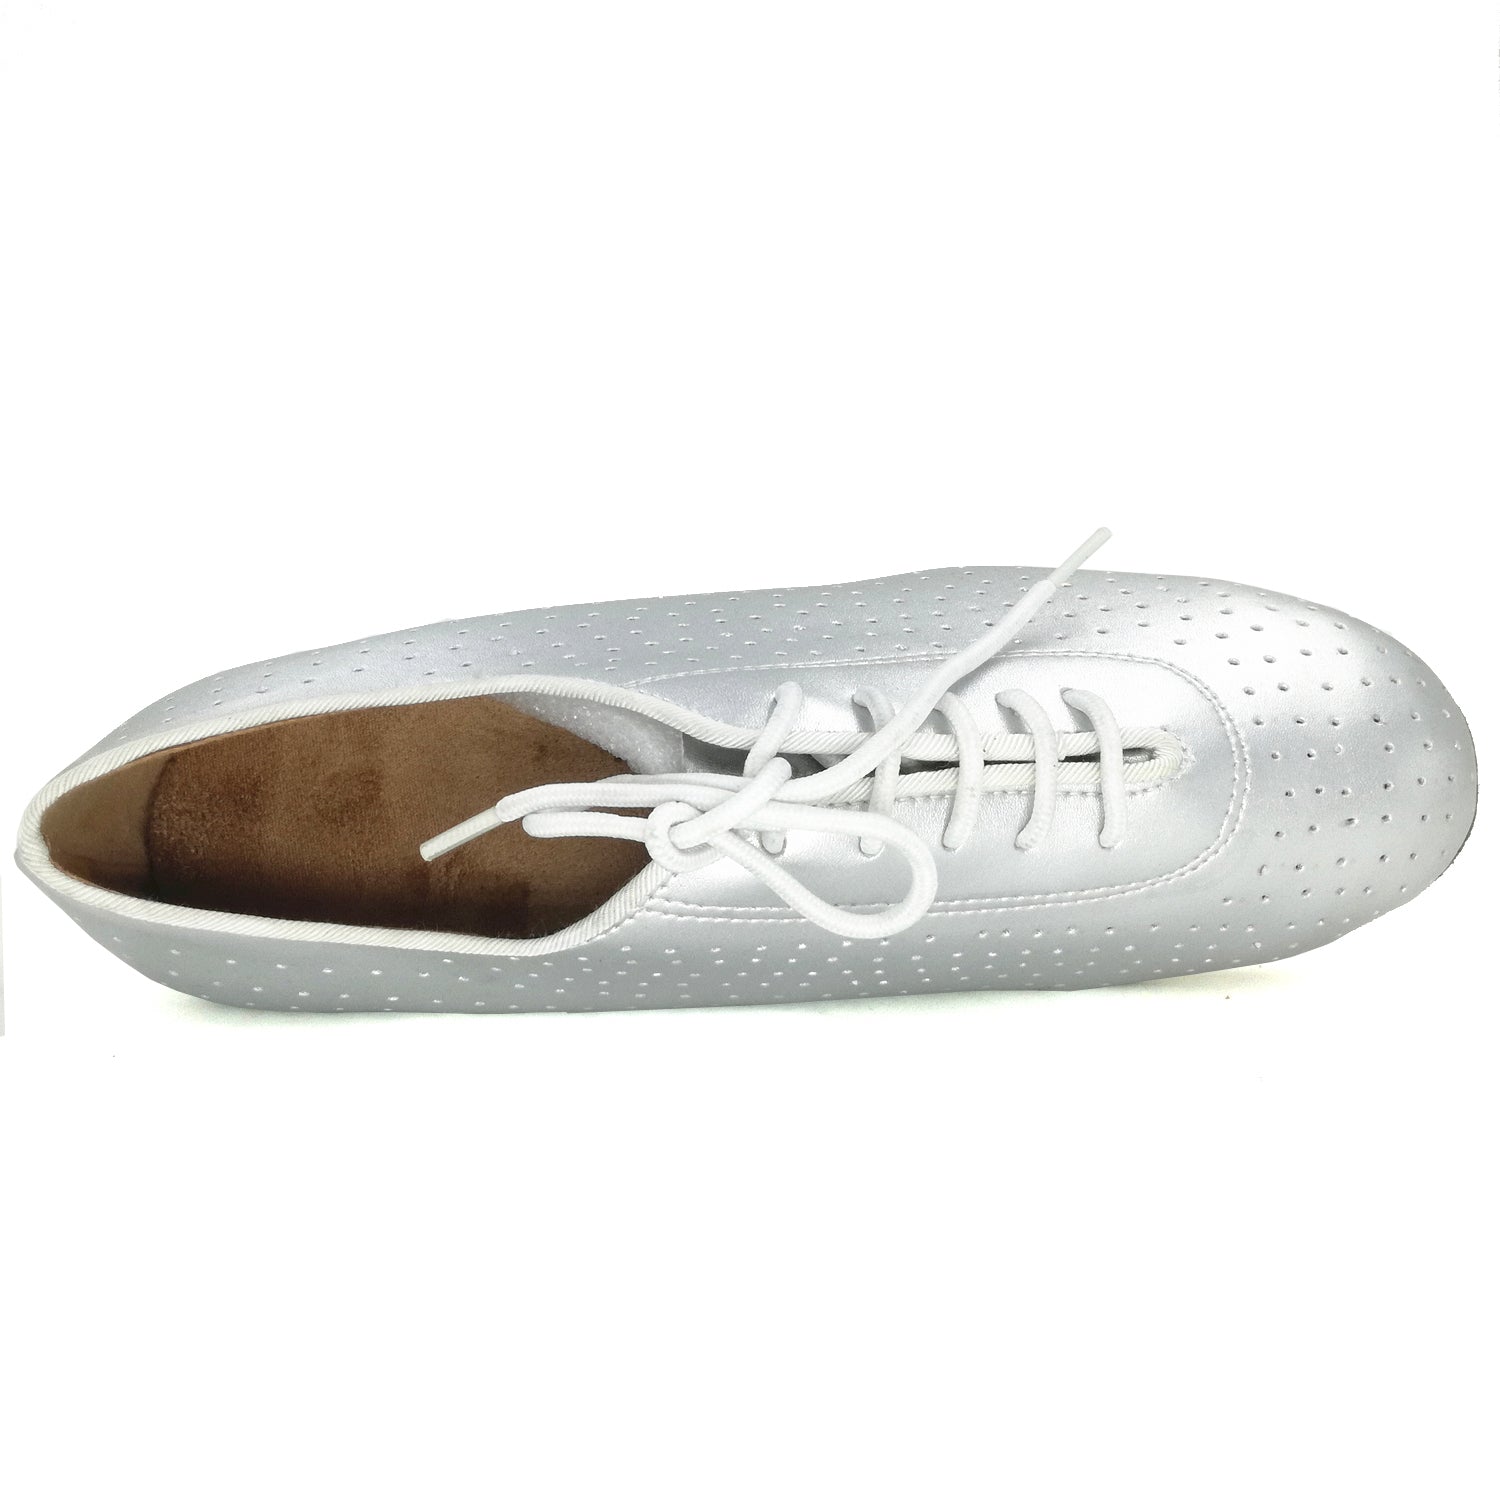 Women Ballroom Dancing Shoes with Suede Sole and Lace-up Closed-toe Design in Silver for Tango Latin Practice (PD5003B)5